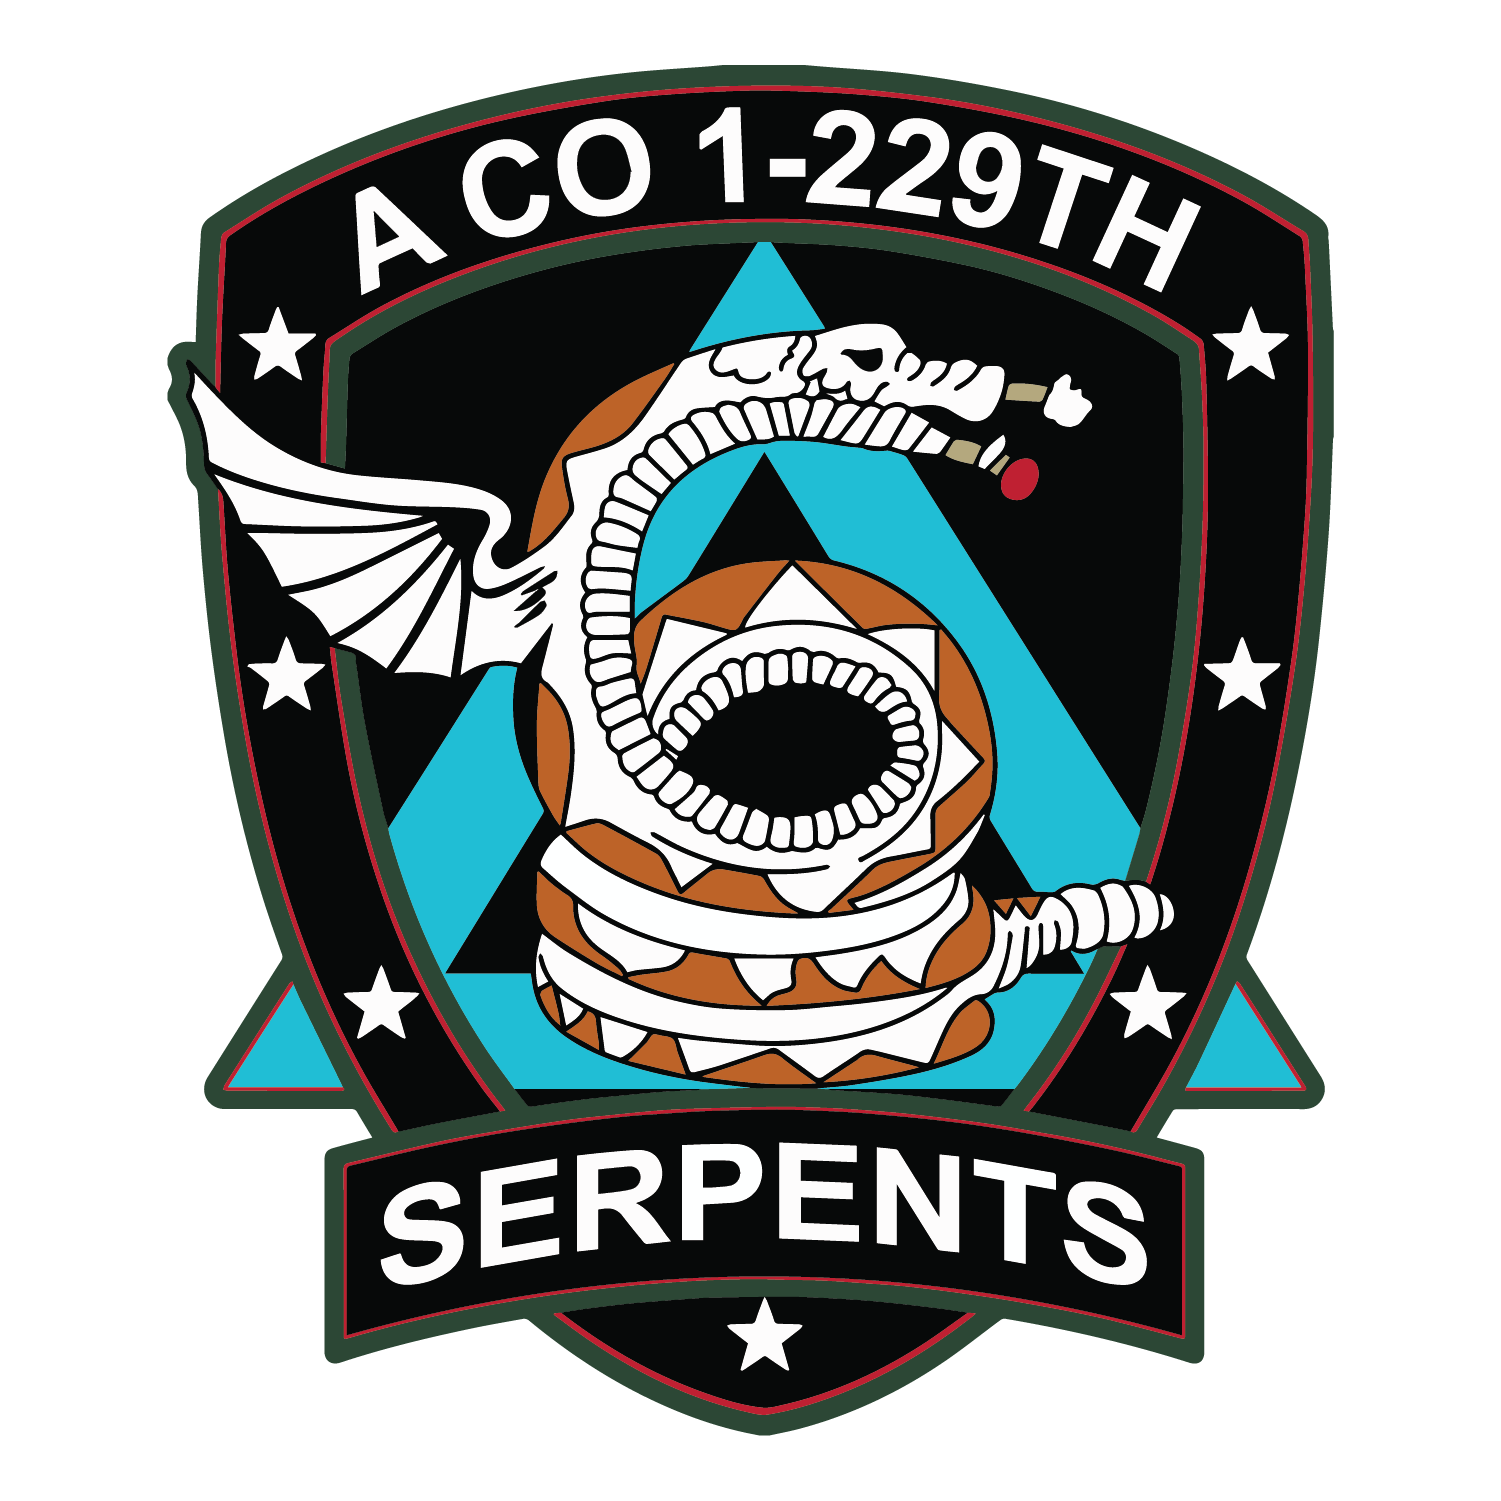 A Co, 1-229 AB "Serpents"